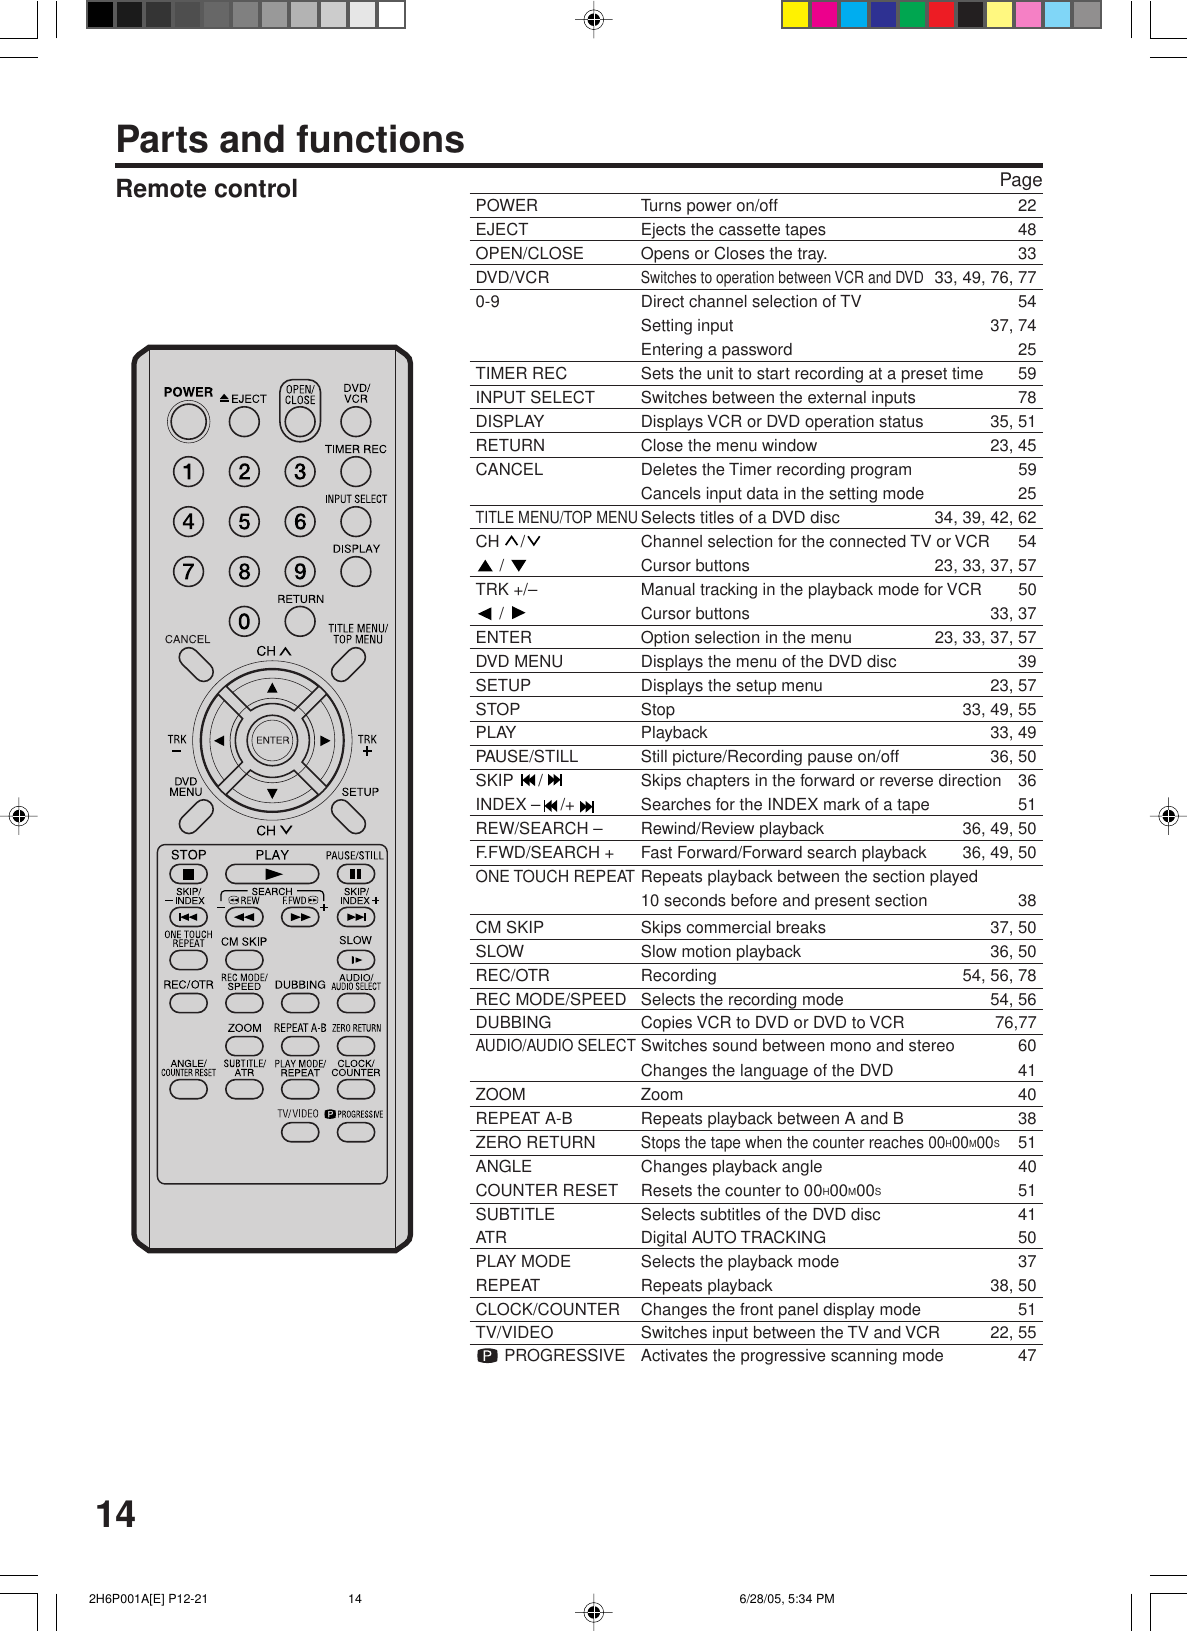 14Remote control PageParts and functionsPOWER Turns power on/off 22EJECT Ejects the cassette tapes 48OPEN/CLOSE Opens or Closes the tray. 33DVD/VCRSwitches to operation between VCR and DVD33, 49, 76, 770-9 Direct channel selection of TV 54Setting input 37, 74Entering a password 25TIMER REC Sets the unit to start recording at a preset time 59INPUT SELECT Switches between the external inputs 78DISPLAY Displays VCR or DVD operation status 35, 51RETURN Close the menu window 23, 45CANCEL Deletes the Timer recording program 59Cancels input data in the setting mode 25TITLE MENU/TOP MENUSelects titles of a DVD disc 34, 39, 42, 62CH  / Channel selection for the connected TV or VCR 54 /  Cursor buttons 23, 33, 37, 57TRK +/– Manual tracking in the playback mode for VCR 50 /  Cursor buttons 33, 37ENTER Option selection in the menu 23, 33, 37, 57DVD MENU Displays the menu of the DVD disc 39SETUP Displays the setup menu 23, 57STOP Stop 33, 49, 55PLAY Playback 33, 49PAUSE/STILL Still picture/Recording pause on/off 36, 50SKIP  / Skips chapters in the forward or reverse direction 36INDEX – /+ Searches for the INDEX mark of a tape 51REW/SEARCH –Rewind/Review playback 36, 49, 50F.FWD/SEARCH +Fast Forward/Forward search playback 36, 49, 50ONE TOUCH REPEATRepeats playback between the section played10 seconds before and present section 38CM SKIP Skips commercial breaks 37, 50SLOW Slow motion playback 36, 50REC/OTR Recording 54, 56, 78REC MODE/SPEED Selects the recording mode 54, 56DUBBING Copies VCR to DVD or DVD to VCR 76,77AUDIO/AUDIO SELECTSwitches sound between mono and stereo 60Changes the language of the DVD 41ZOOM Zoom 40REPEAT A-B Repeats playback between A and B 38ZERO RETURNStops the tape when the counter reaches 00H00M00S51ANGLE Changes playback angle 40COUNTER RESET Resets the counter to 00H00M00S51SUBTITLE Selects subtitles of the DVD disc 41ATR Digital AUTO TRACKING 50PLAY MODE Selects the playback mode 37REPEAT Repeats playback 38, 50CLOCK/COUNTER Changes the front panel display mode 51TV/VIDEO Switches input between the TV and VCR 22, 55 PROGRESSIVE Activates the progressive scanning mode 47 2H6P001A[E] P12-21 6/28/05, 5:34 PM14